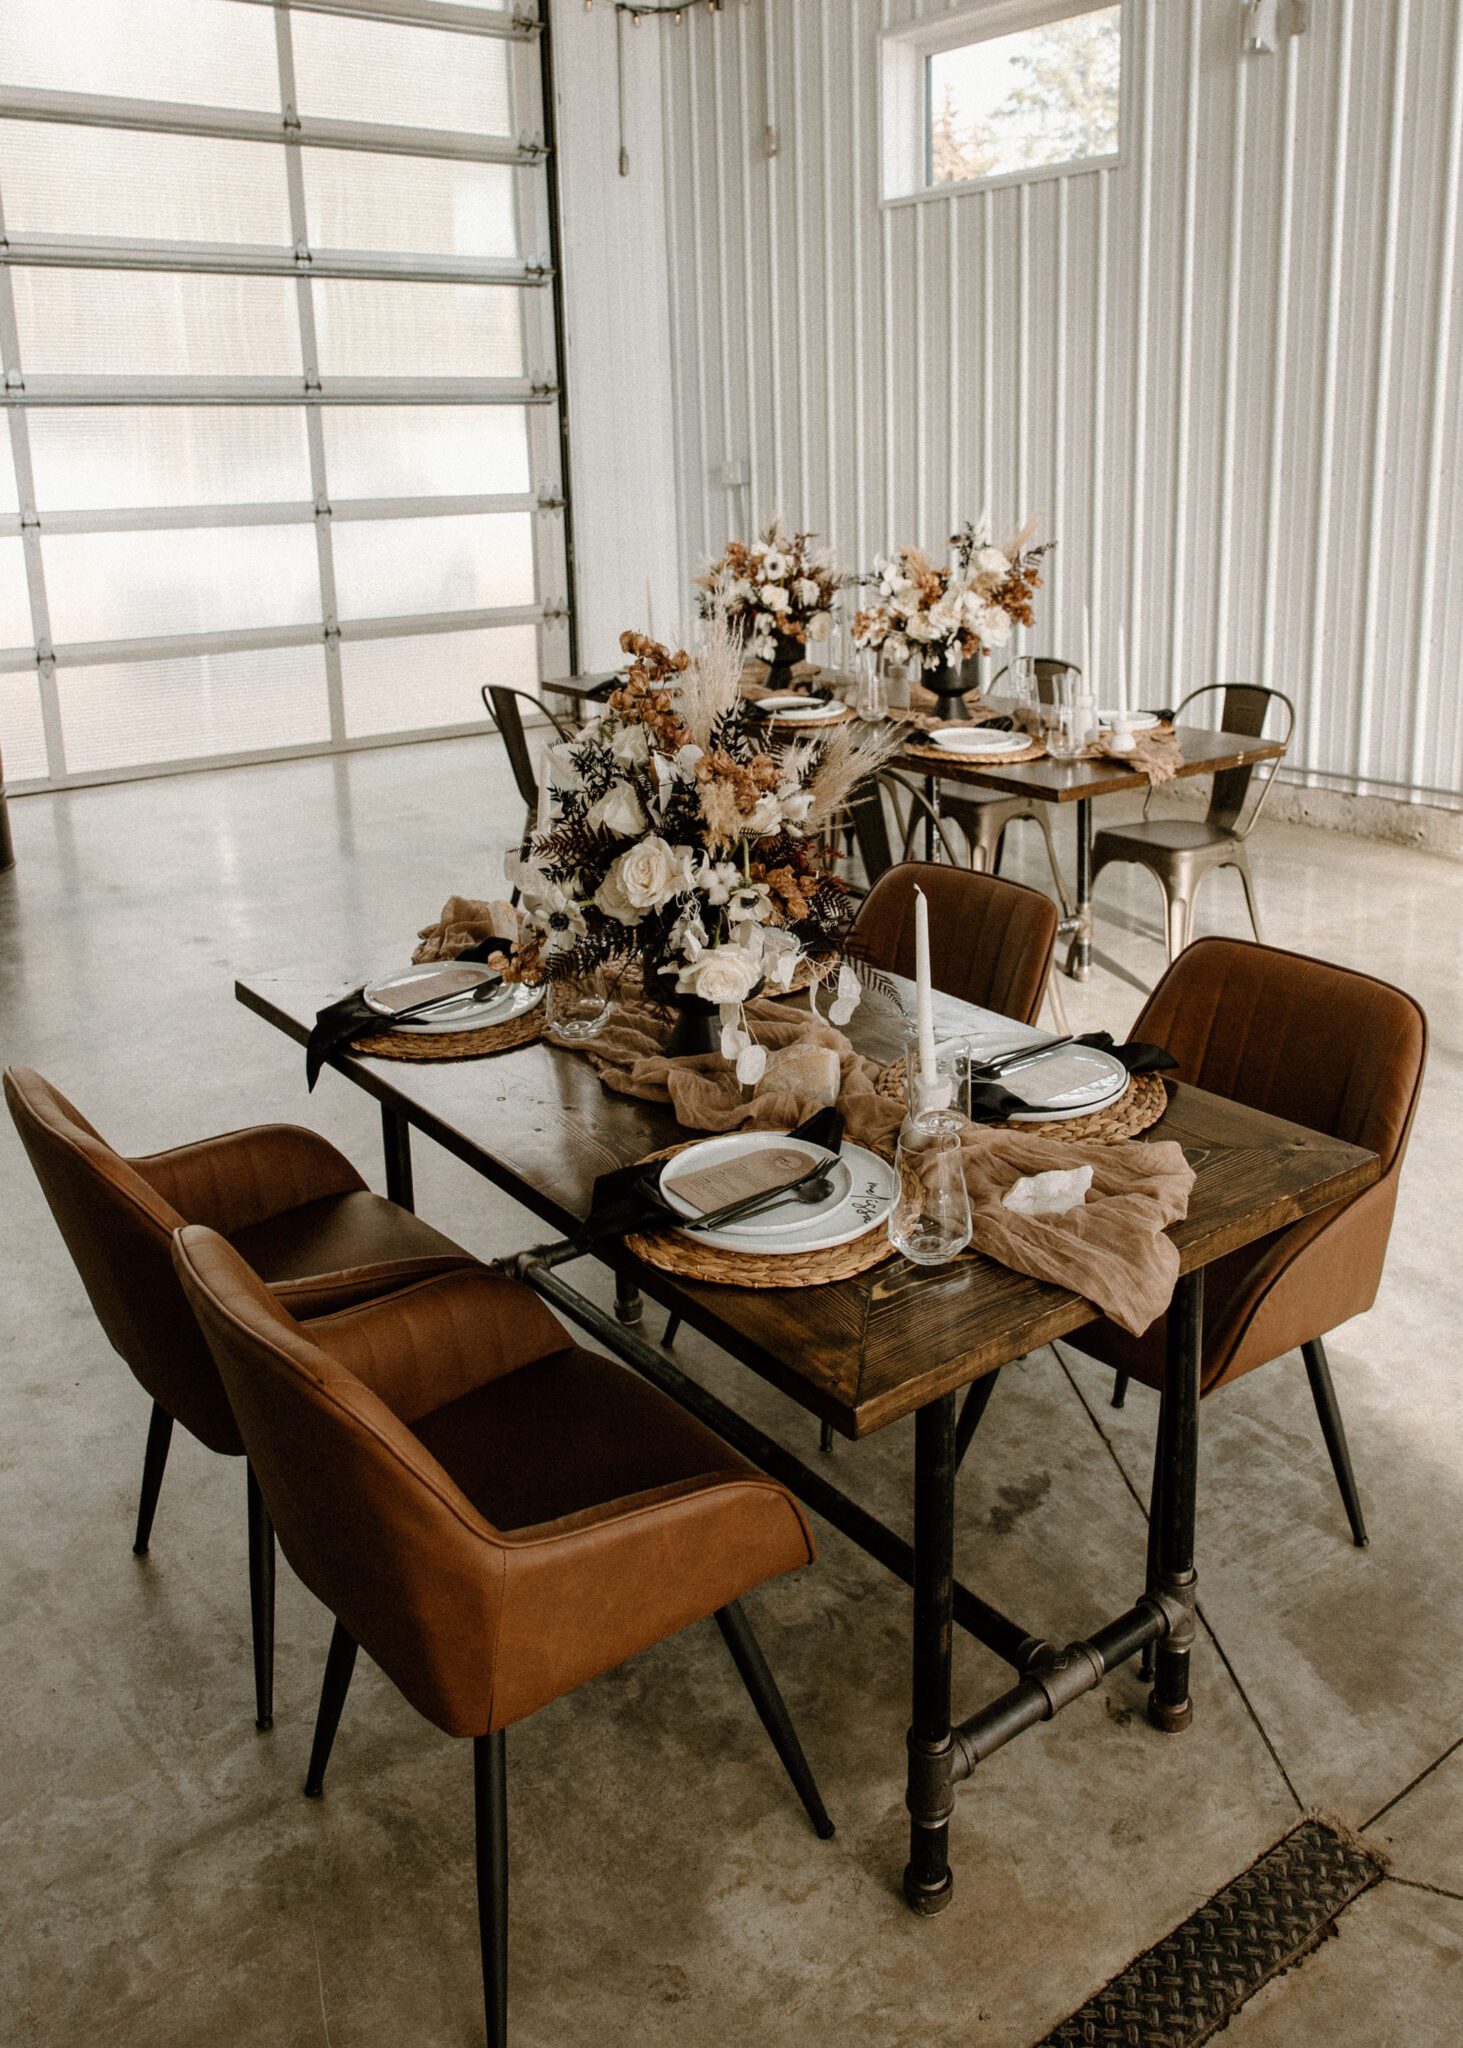 Reception room details featuring rich brown textures and tones at 52 North Venue, warm-toned floral arrangements, warm and moody wedding inspiration. 